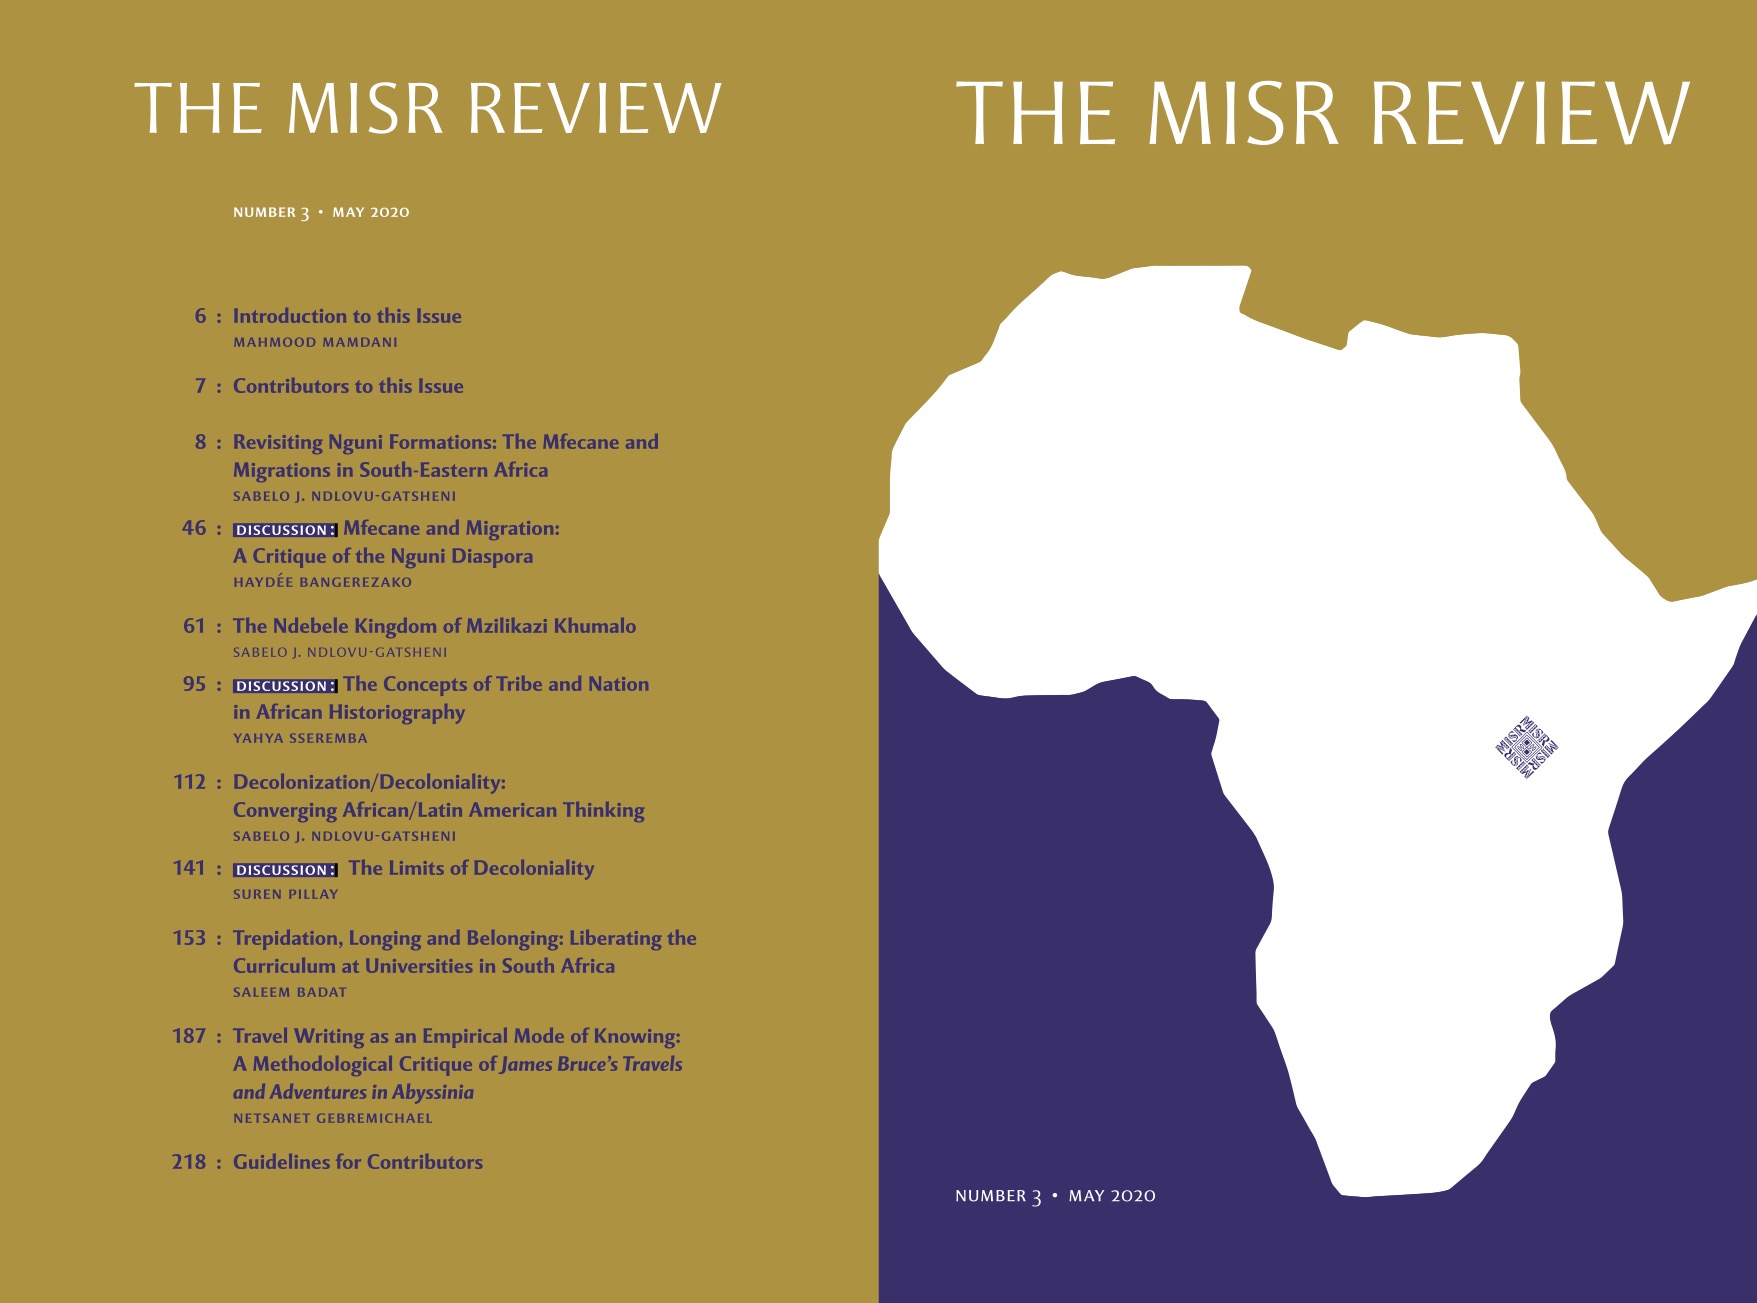 The Makerere Institute of Social Research (MISR) Review No. 3.